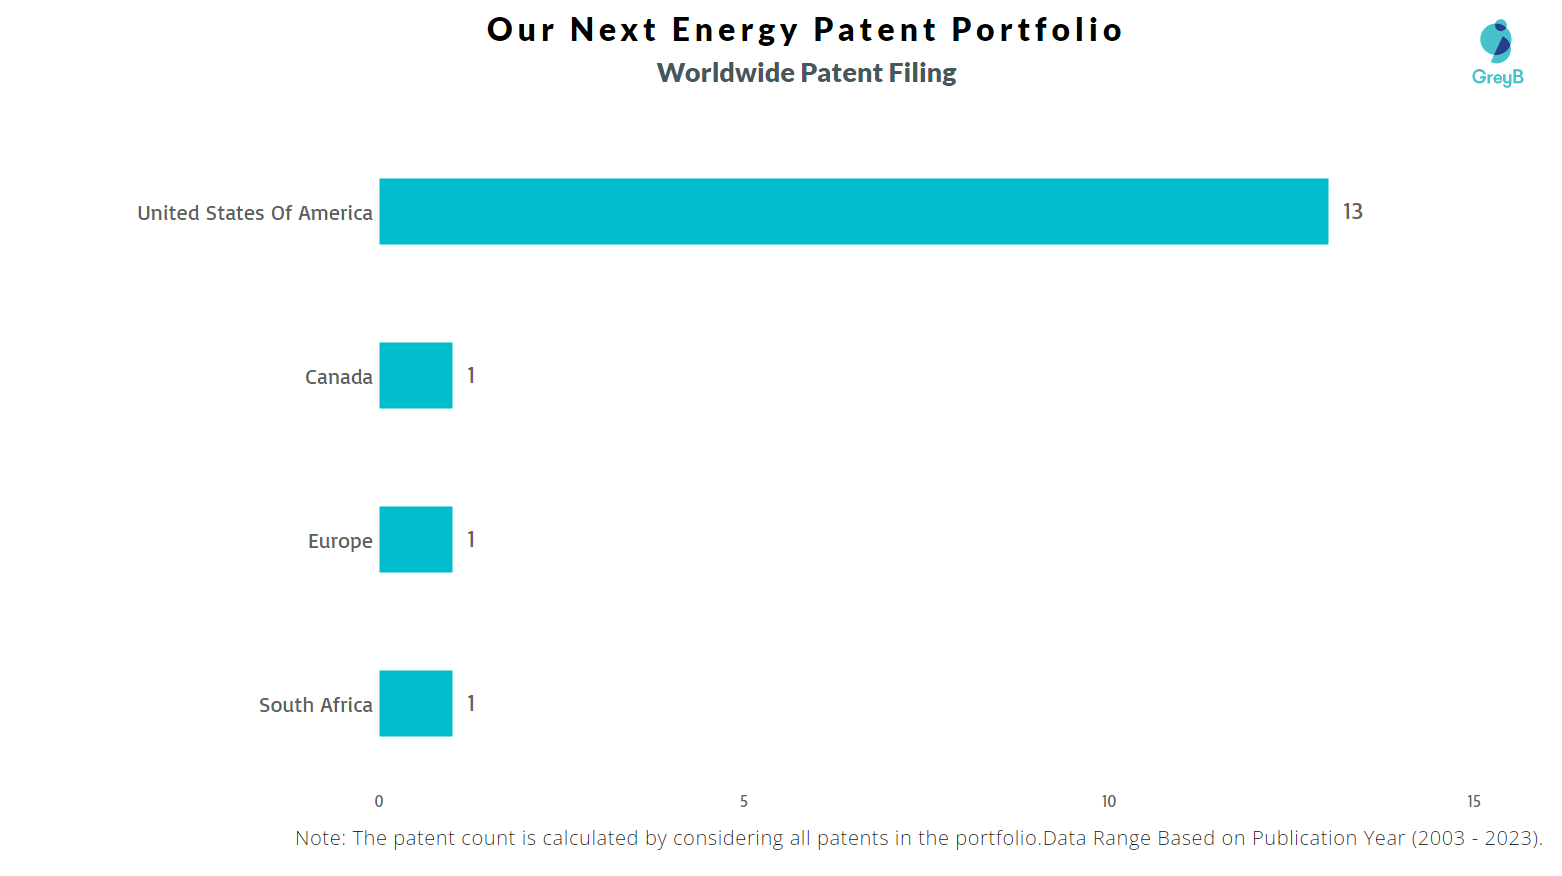 Our Next Energy Worldwide Patents